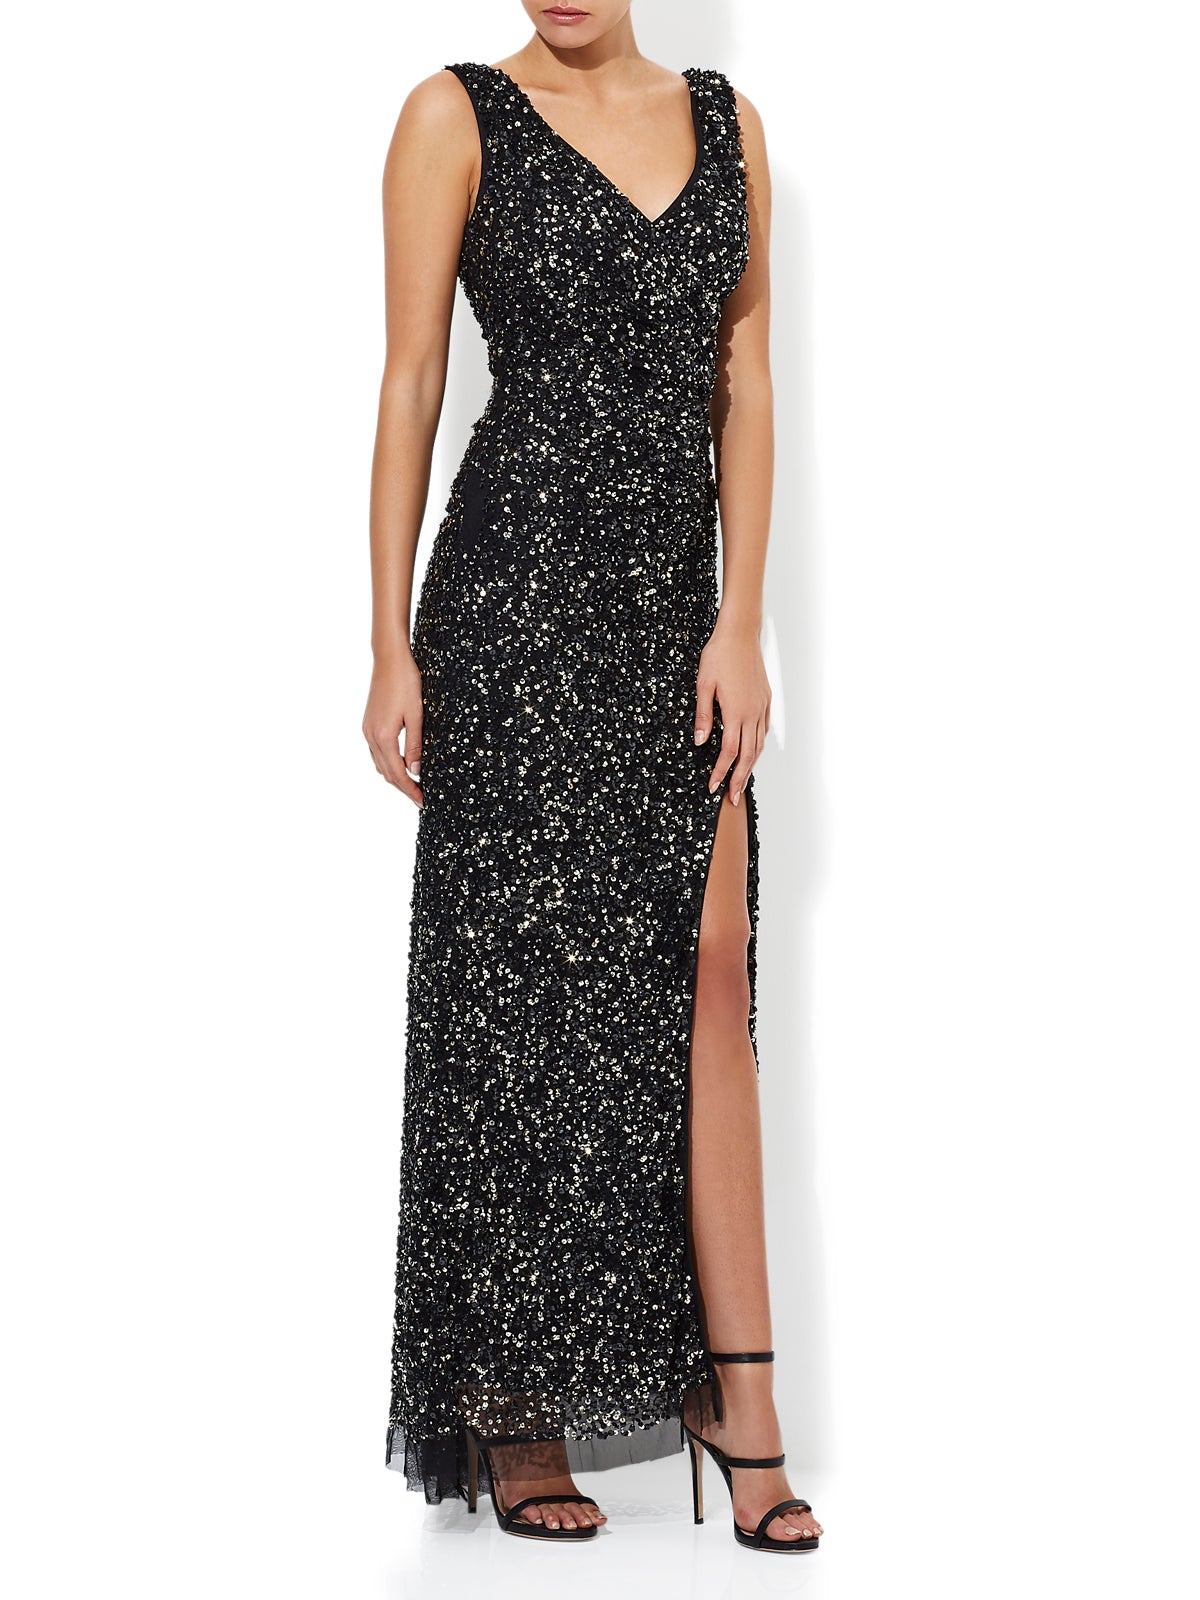 Layla Hand Beaded Gown by Montique